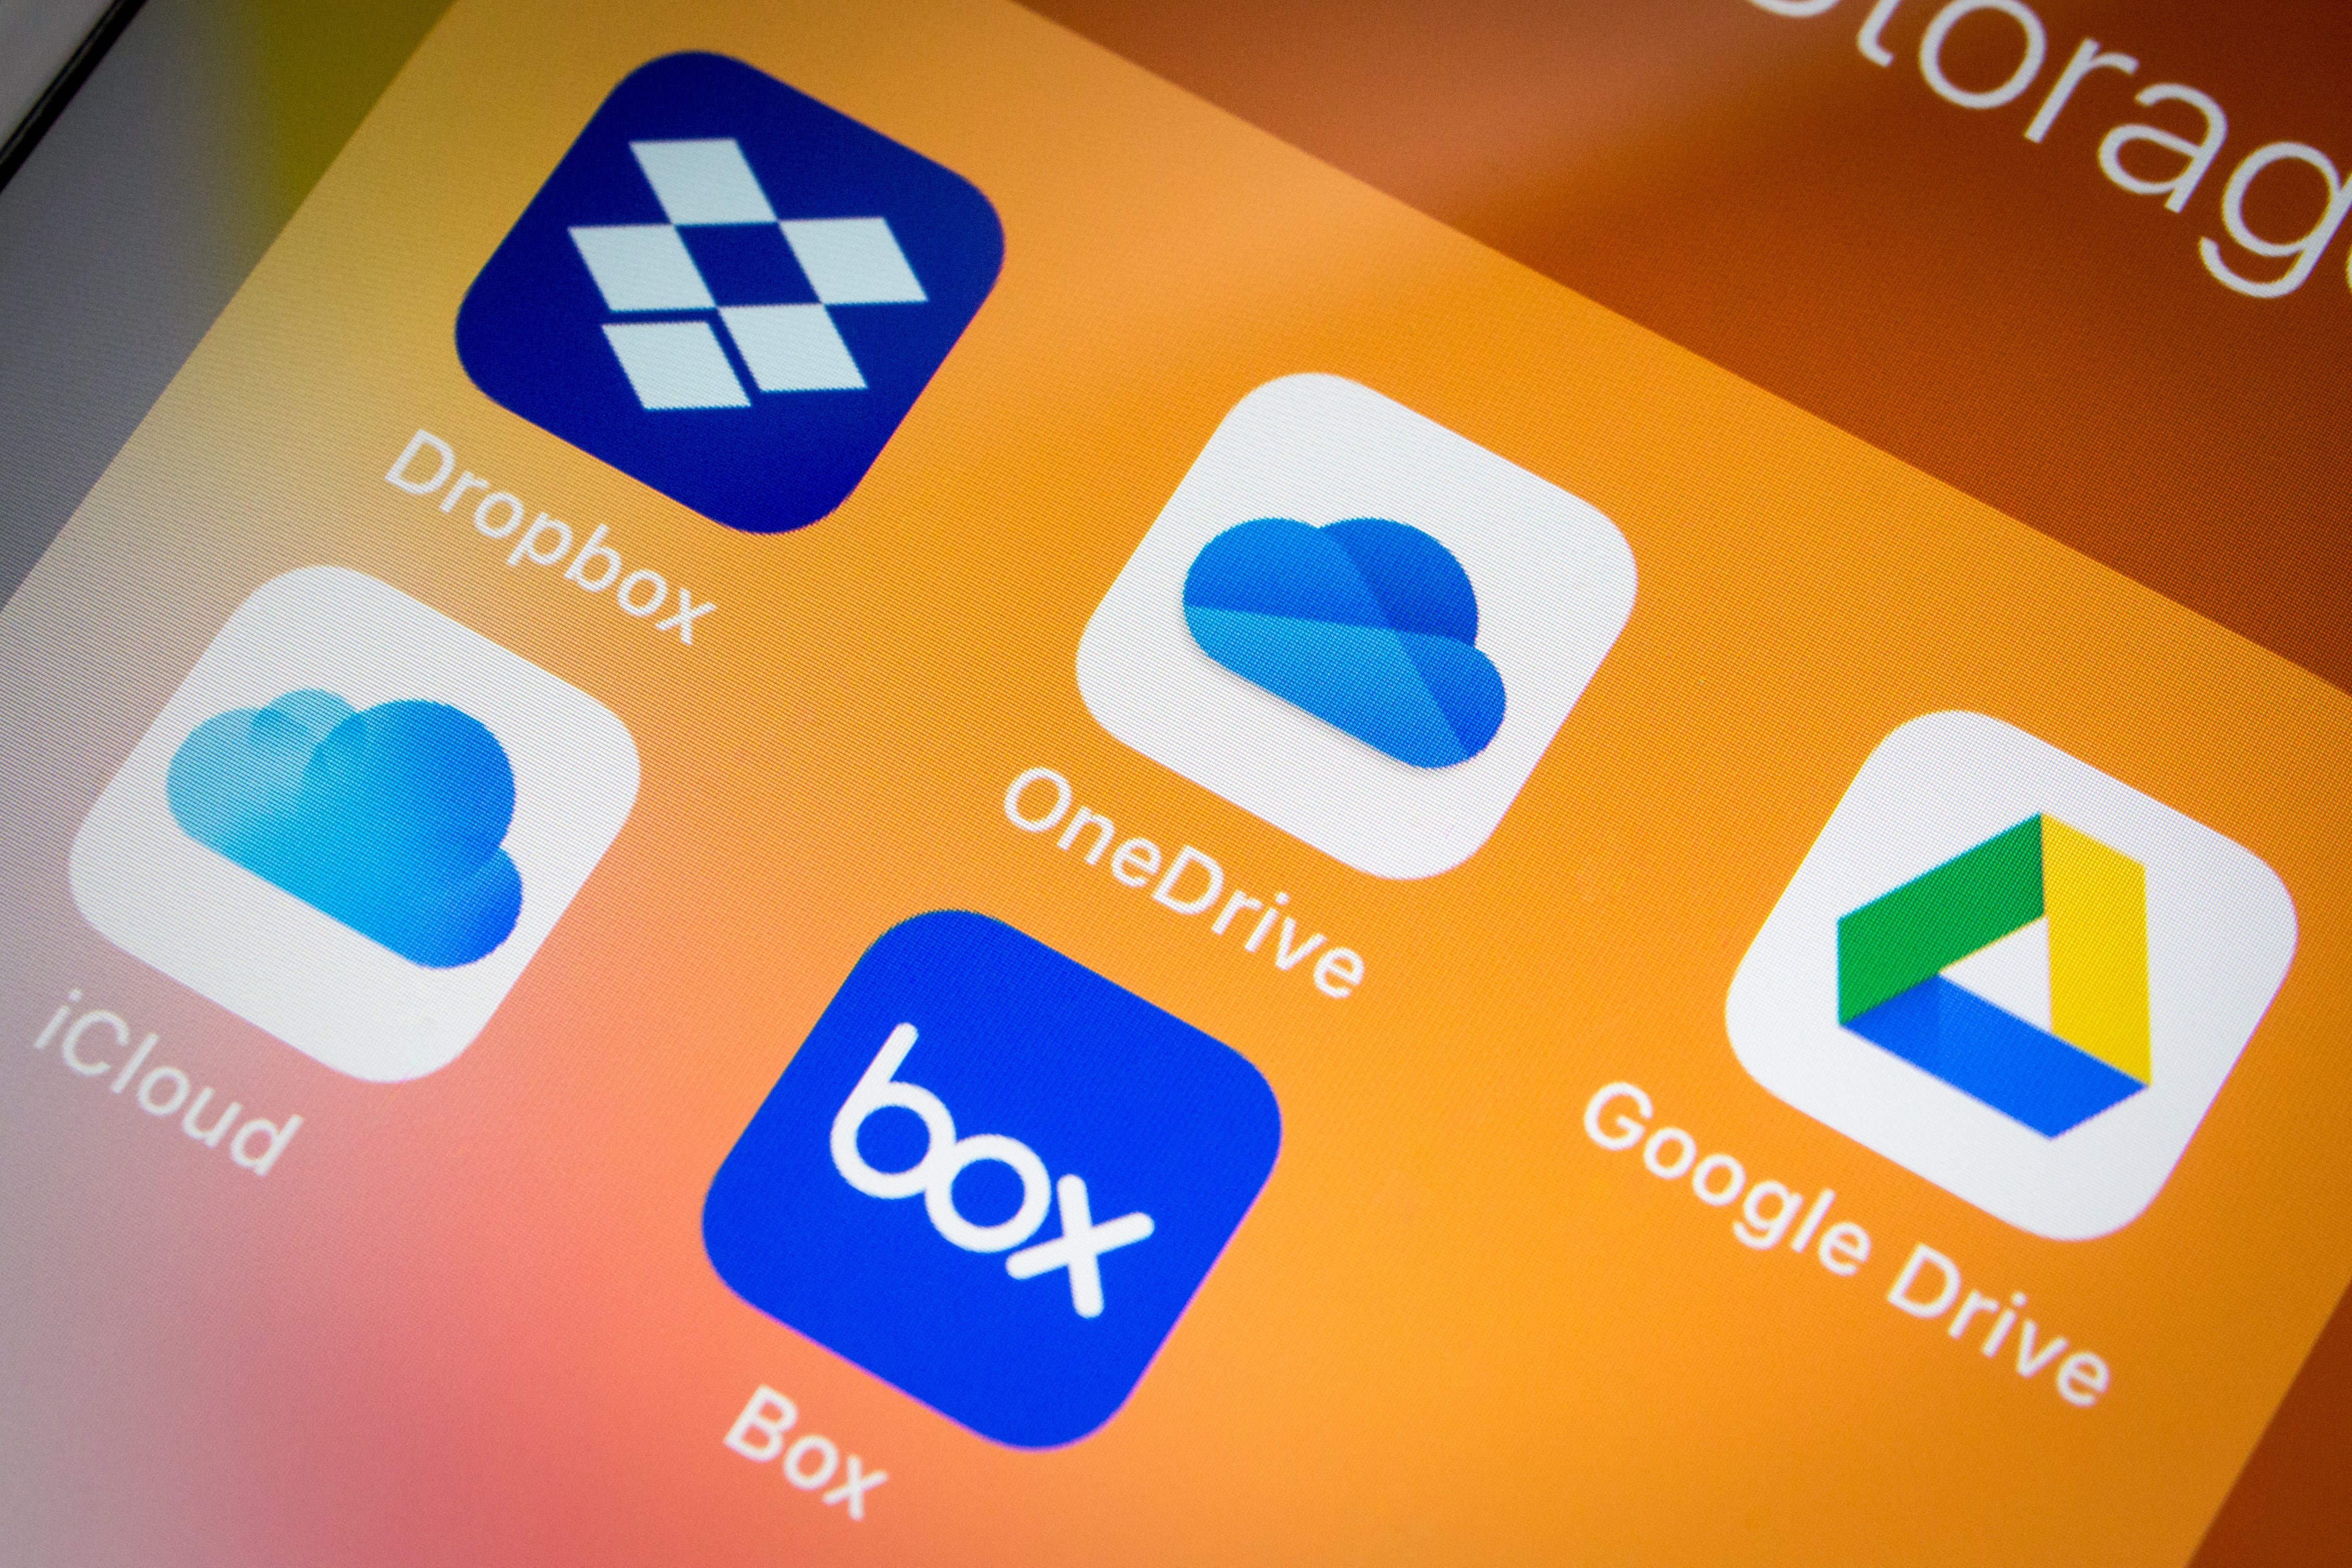 Integrating with Google Drive, Dropbox, and OneDrive